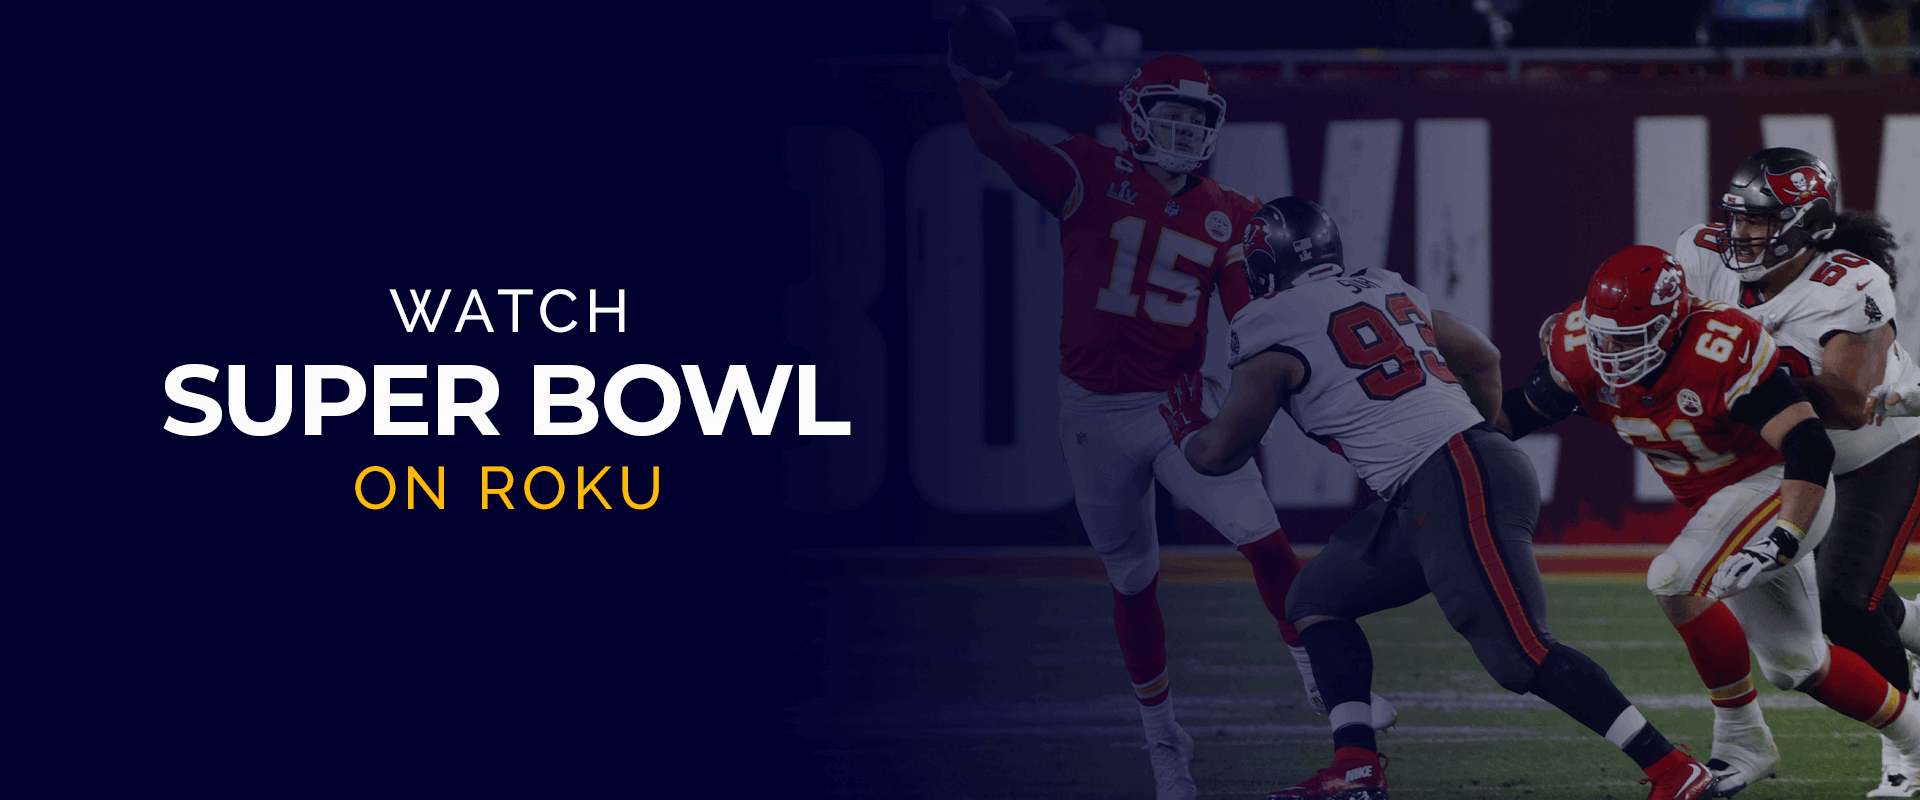 How To Watch Super Bowl 2018 On Roku